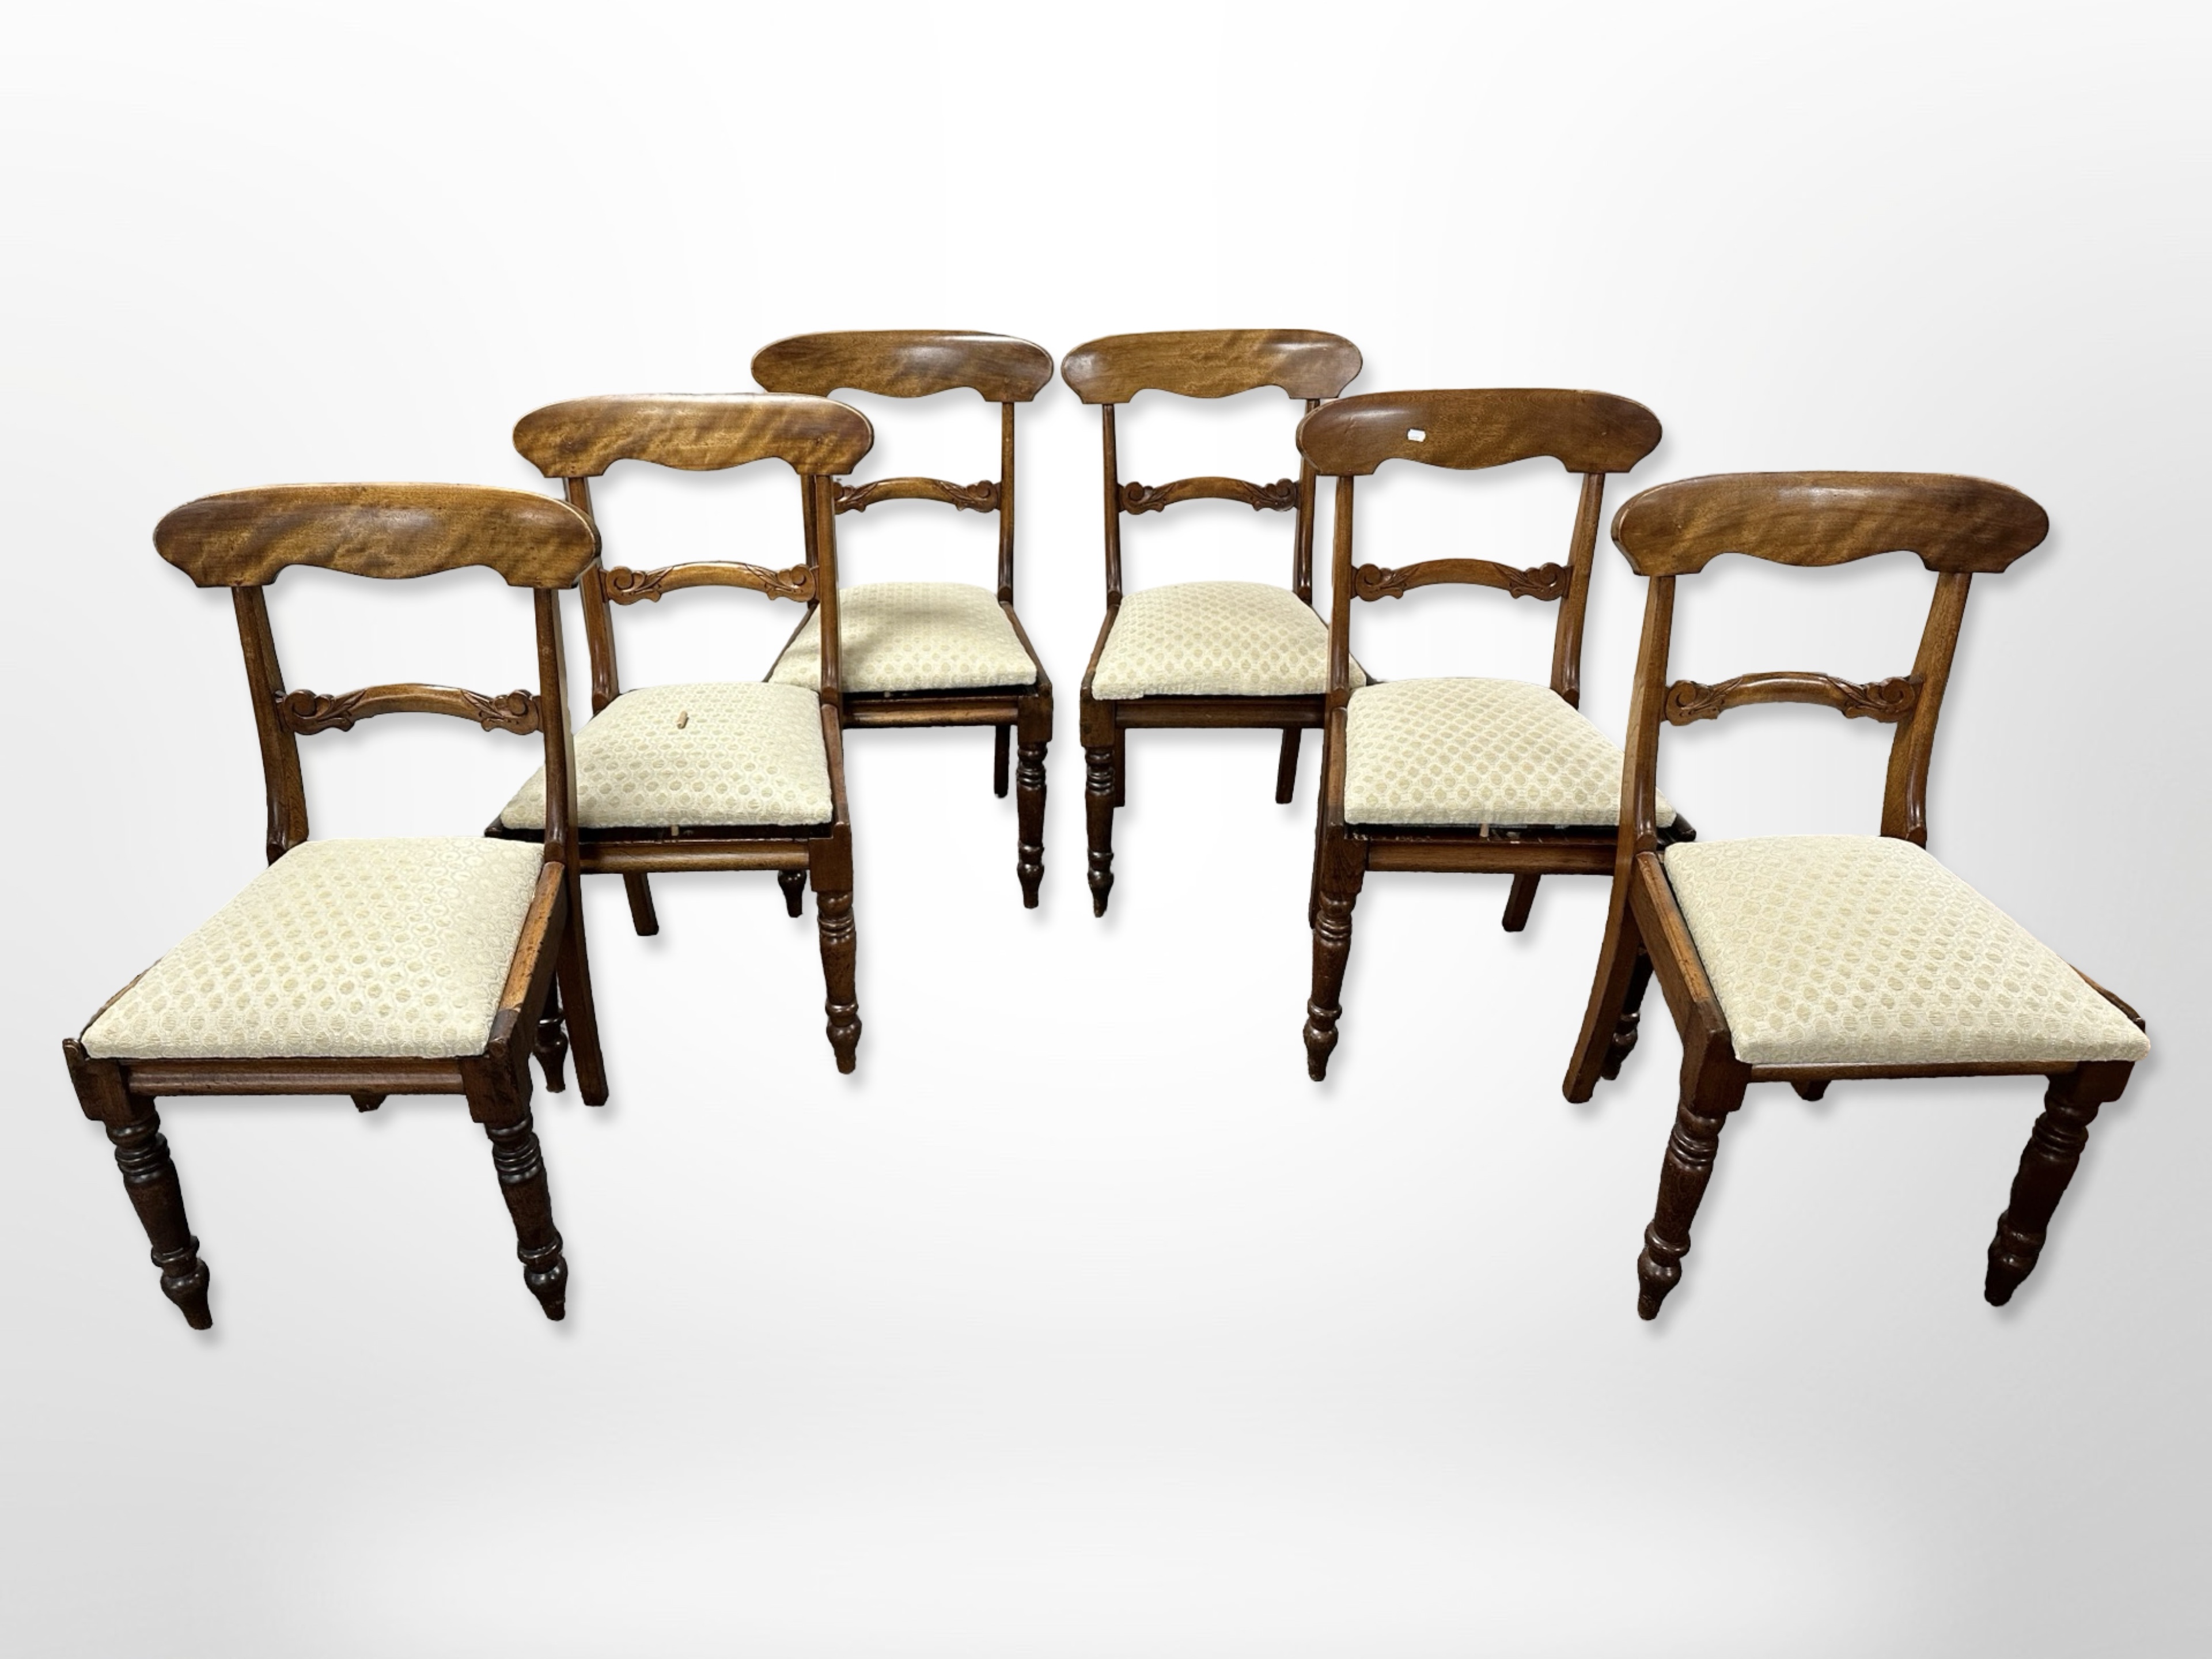 A set of four mahogany reproduction dining chairs